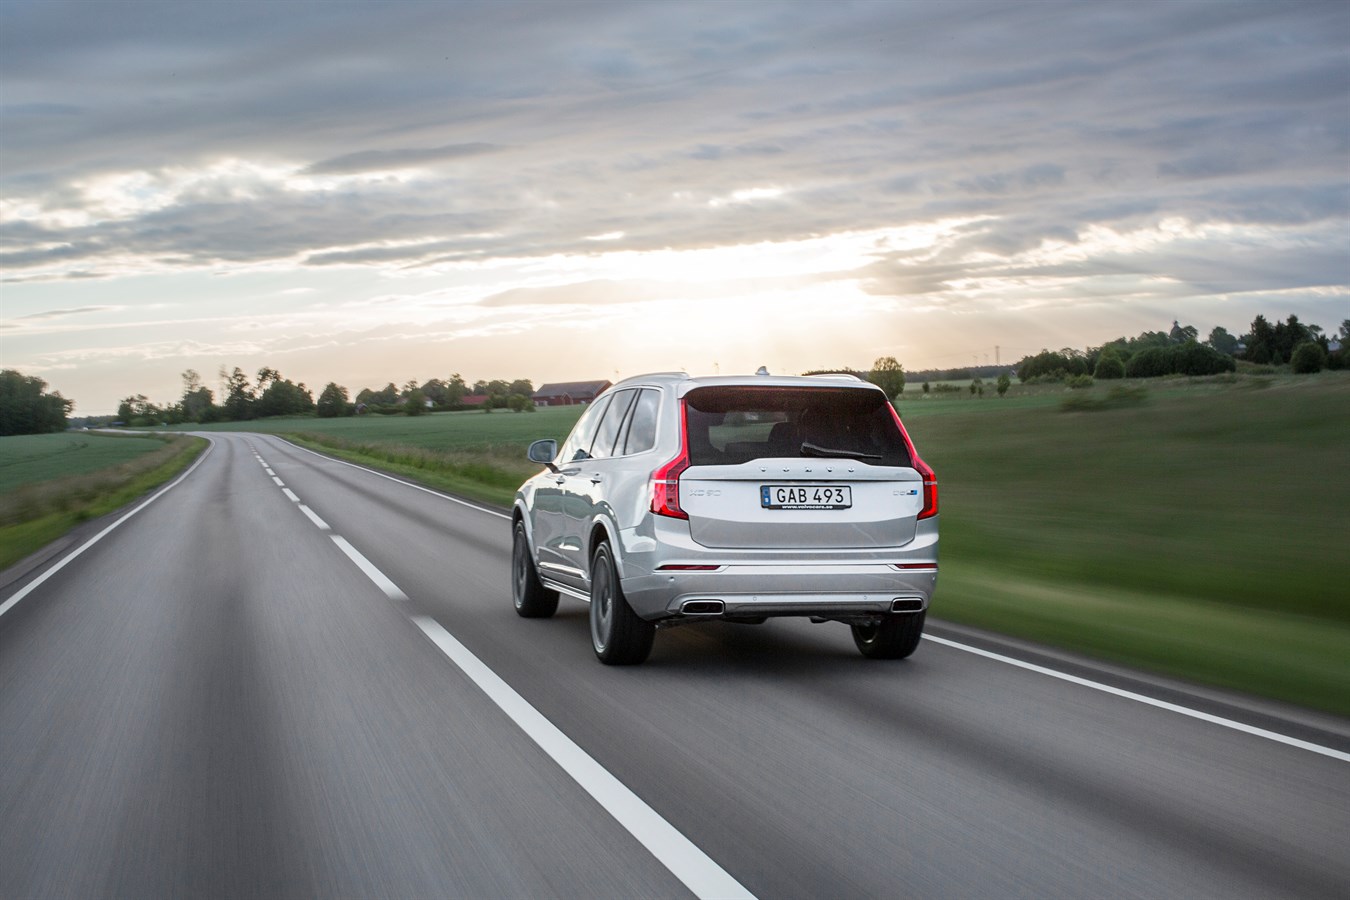 VOLVO BOOSTS PERFORMANCE OF ITS XC90 WITH RANGE OF POLESTAR UPGRADES